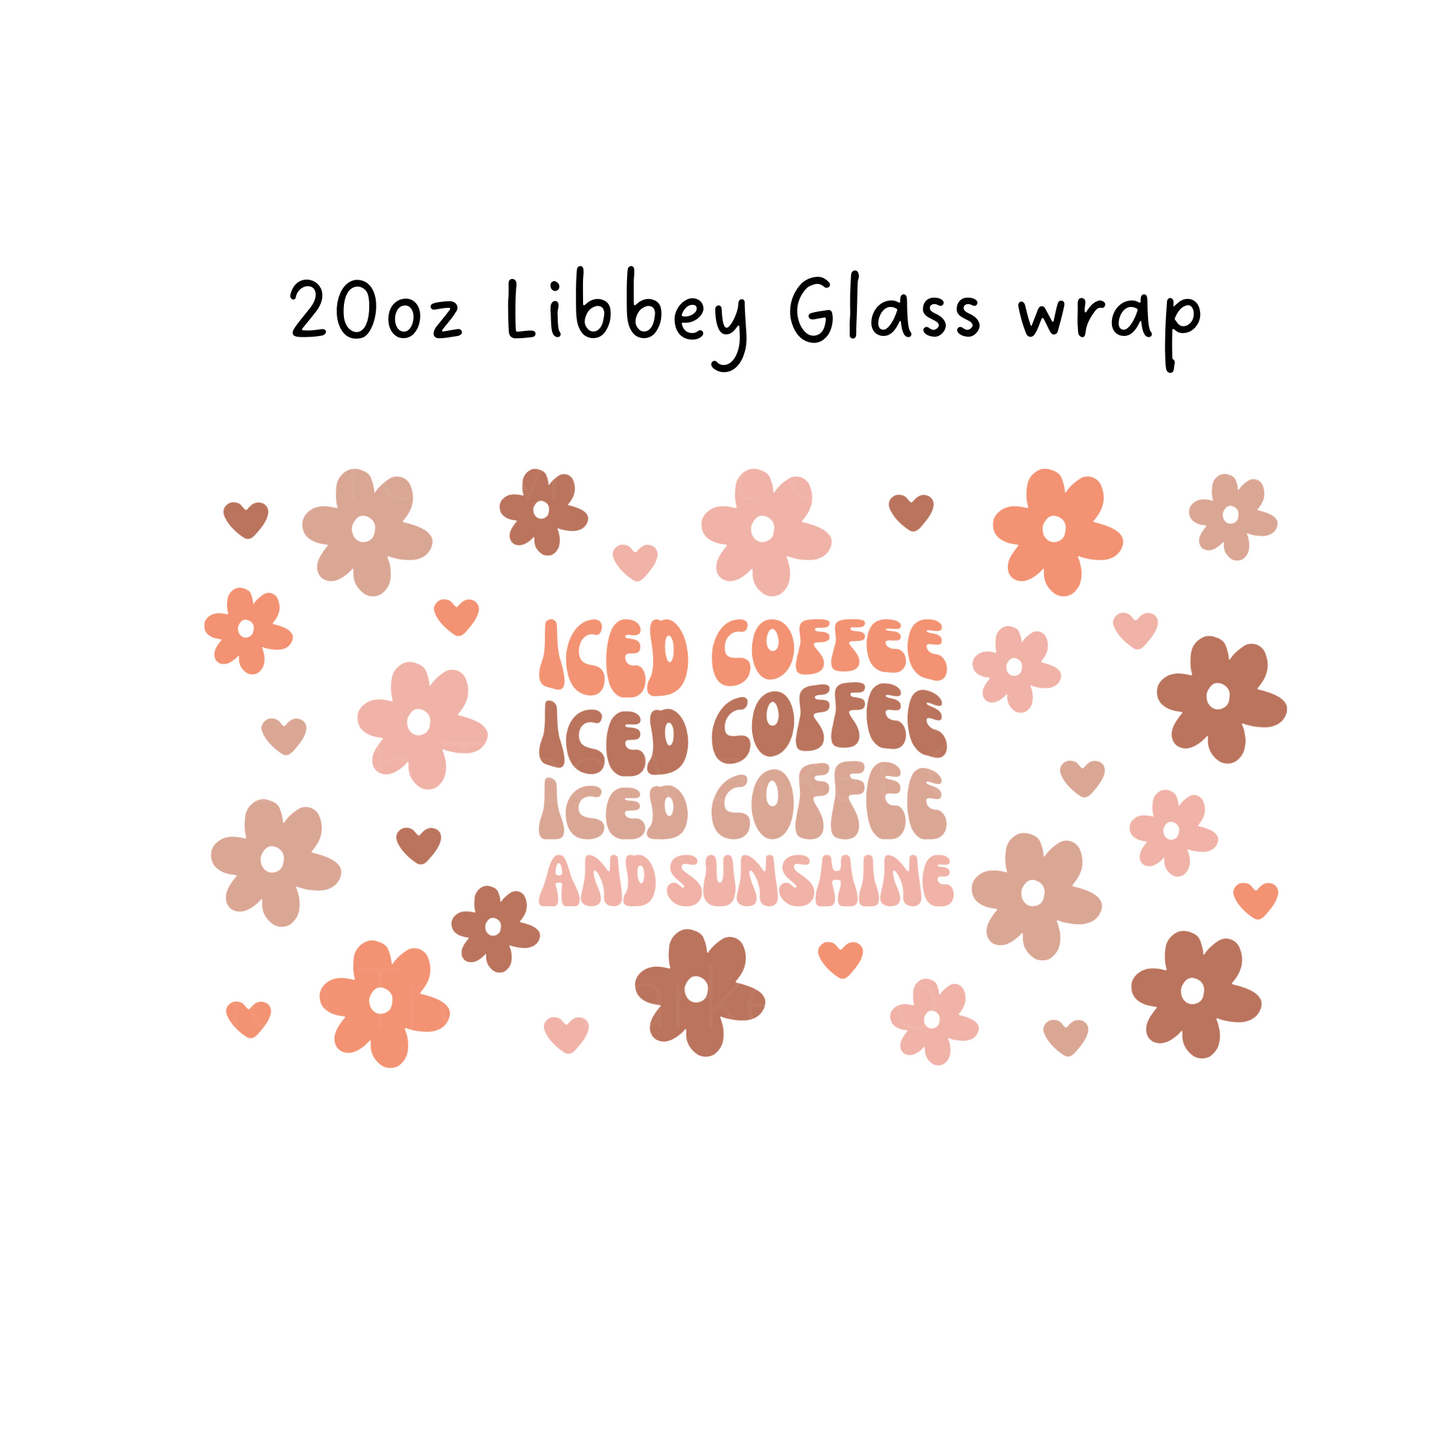 Iced Coffee and Sunshine 20oz Libbey Beer Glass Wrap